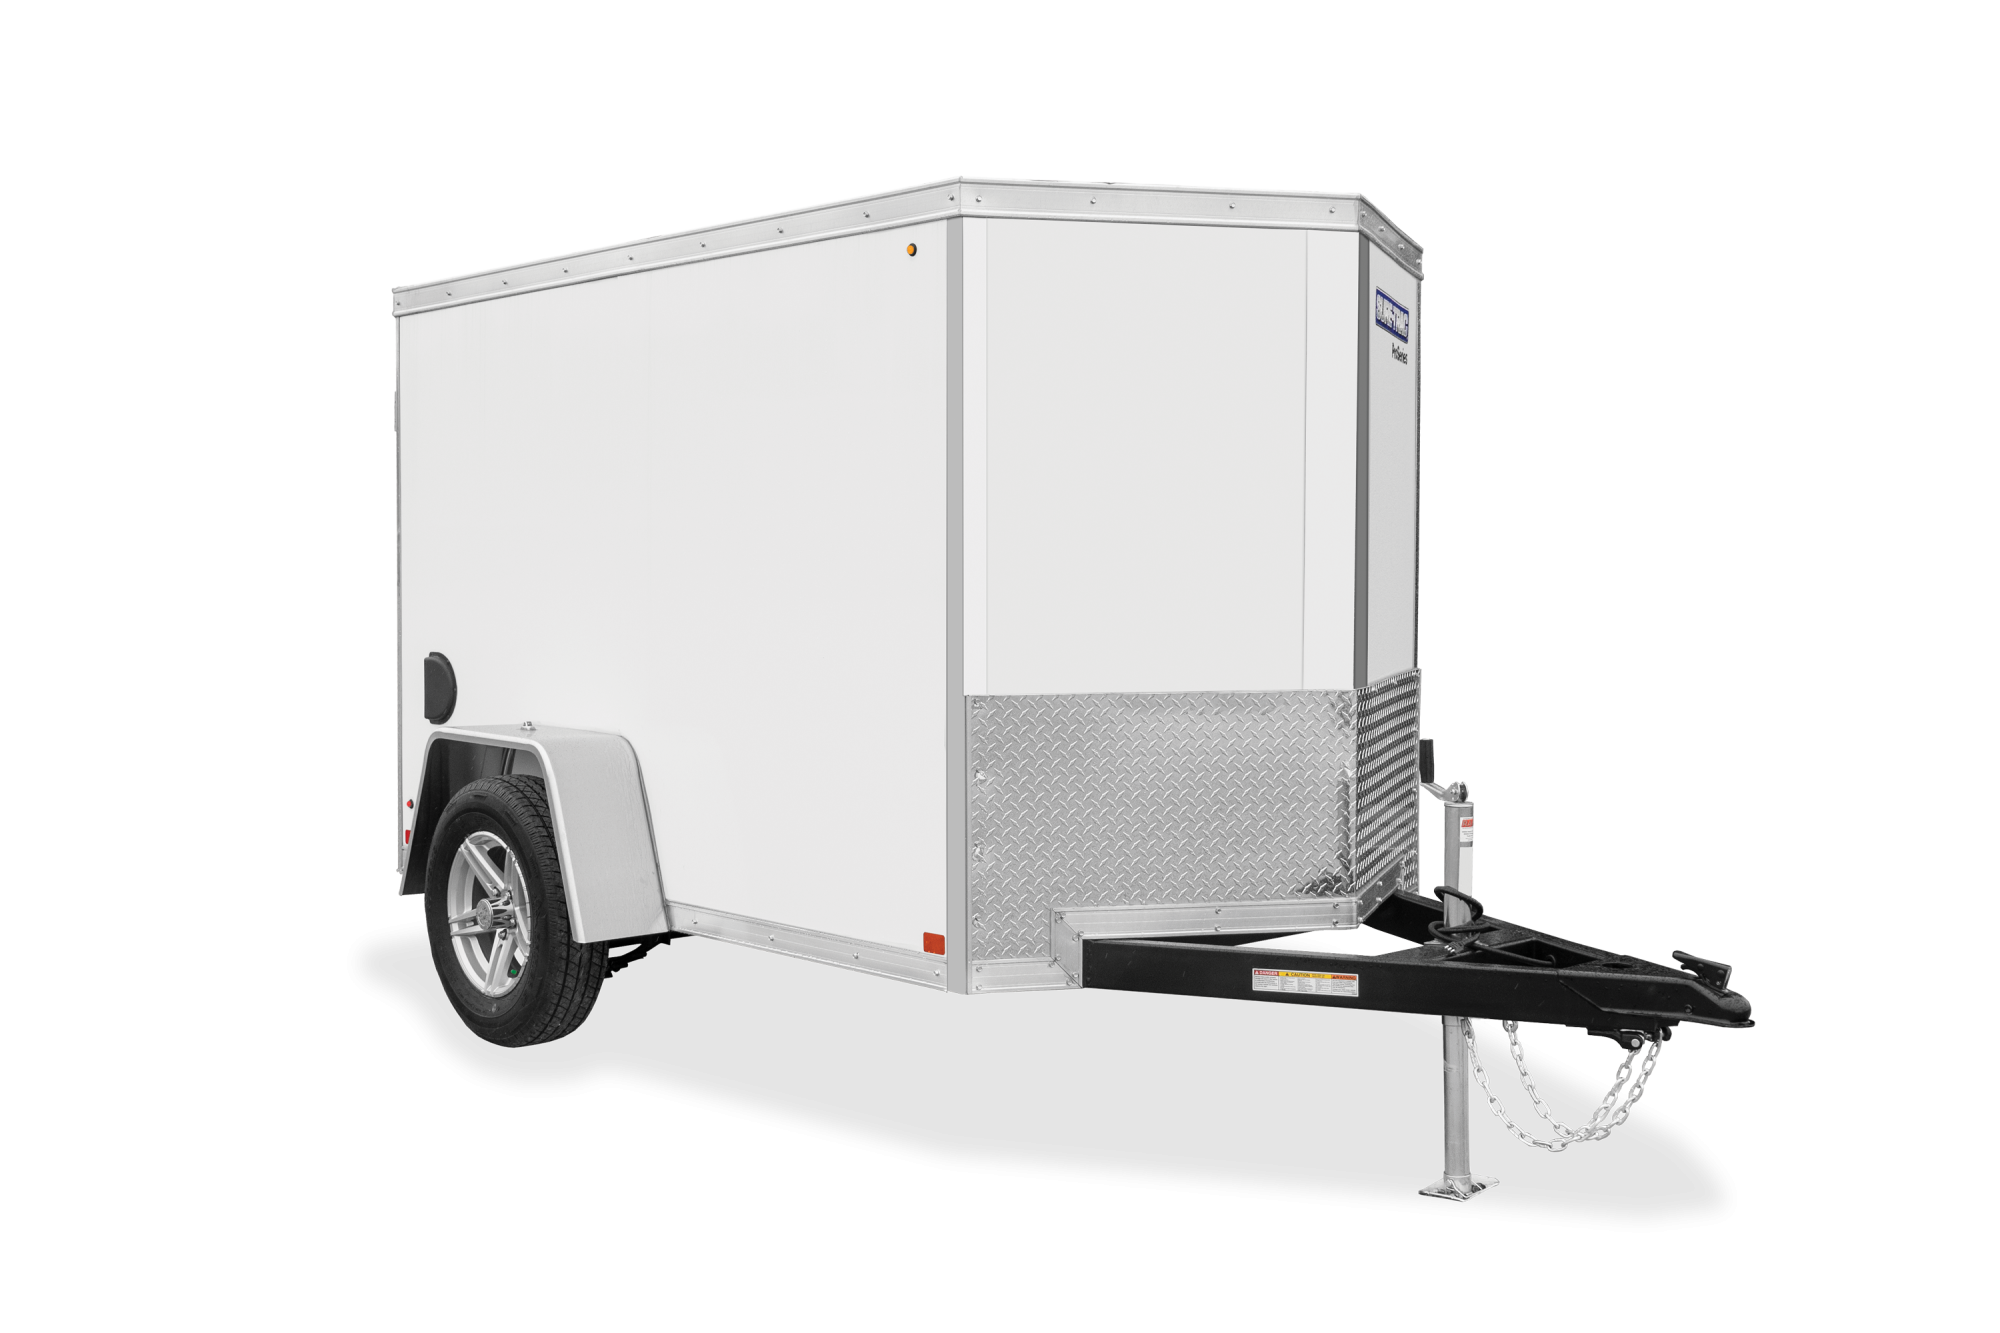 Front view of a white single axle pro series wedge cargo enclosed trailer